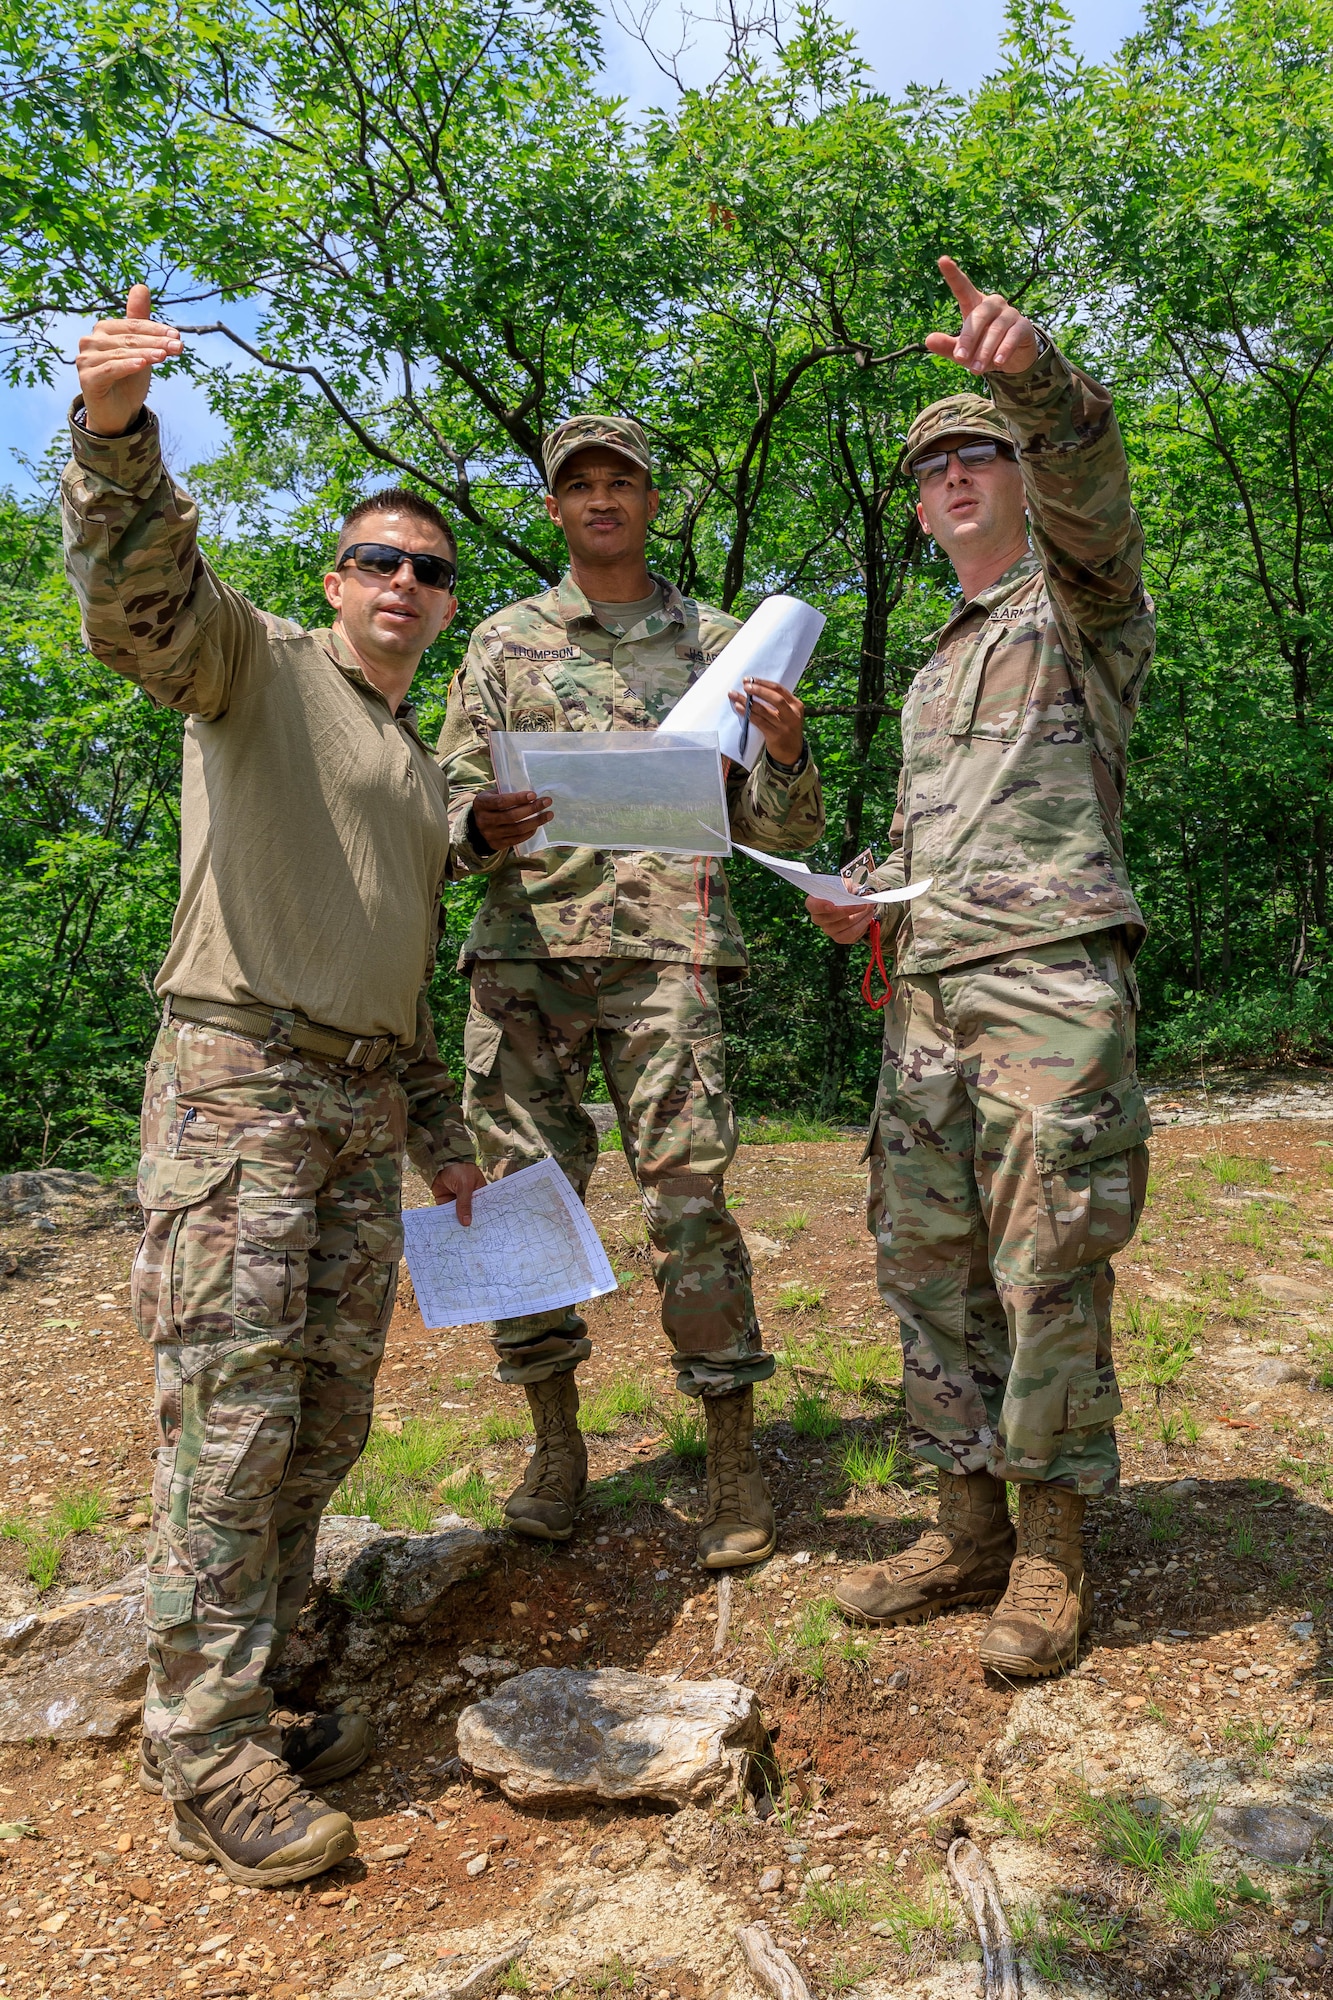 Capt. Sterling Broadhead (left), 82nd Aerial Port Squadron in the 349th Air Mobility Wing, teaches Sgt. Stanley Thompson (center), 108th Training Command, and Sgt. Michael Yarrington (right), 108th Training Command, basic orienteering skills at Camp Ethan Allen, Vermont as part of the team selection and training event for the Interallied Confederation of Reserve Officers military competition, July 20th. Ten service members from the U.S. Army and Air Force reserve components train in Vermont to prepare for the CIOR MILCOMP, an annual competition among NATO and Partnership for Peace nations.